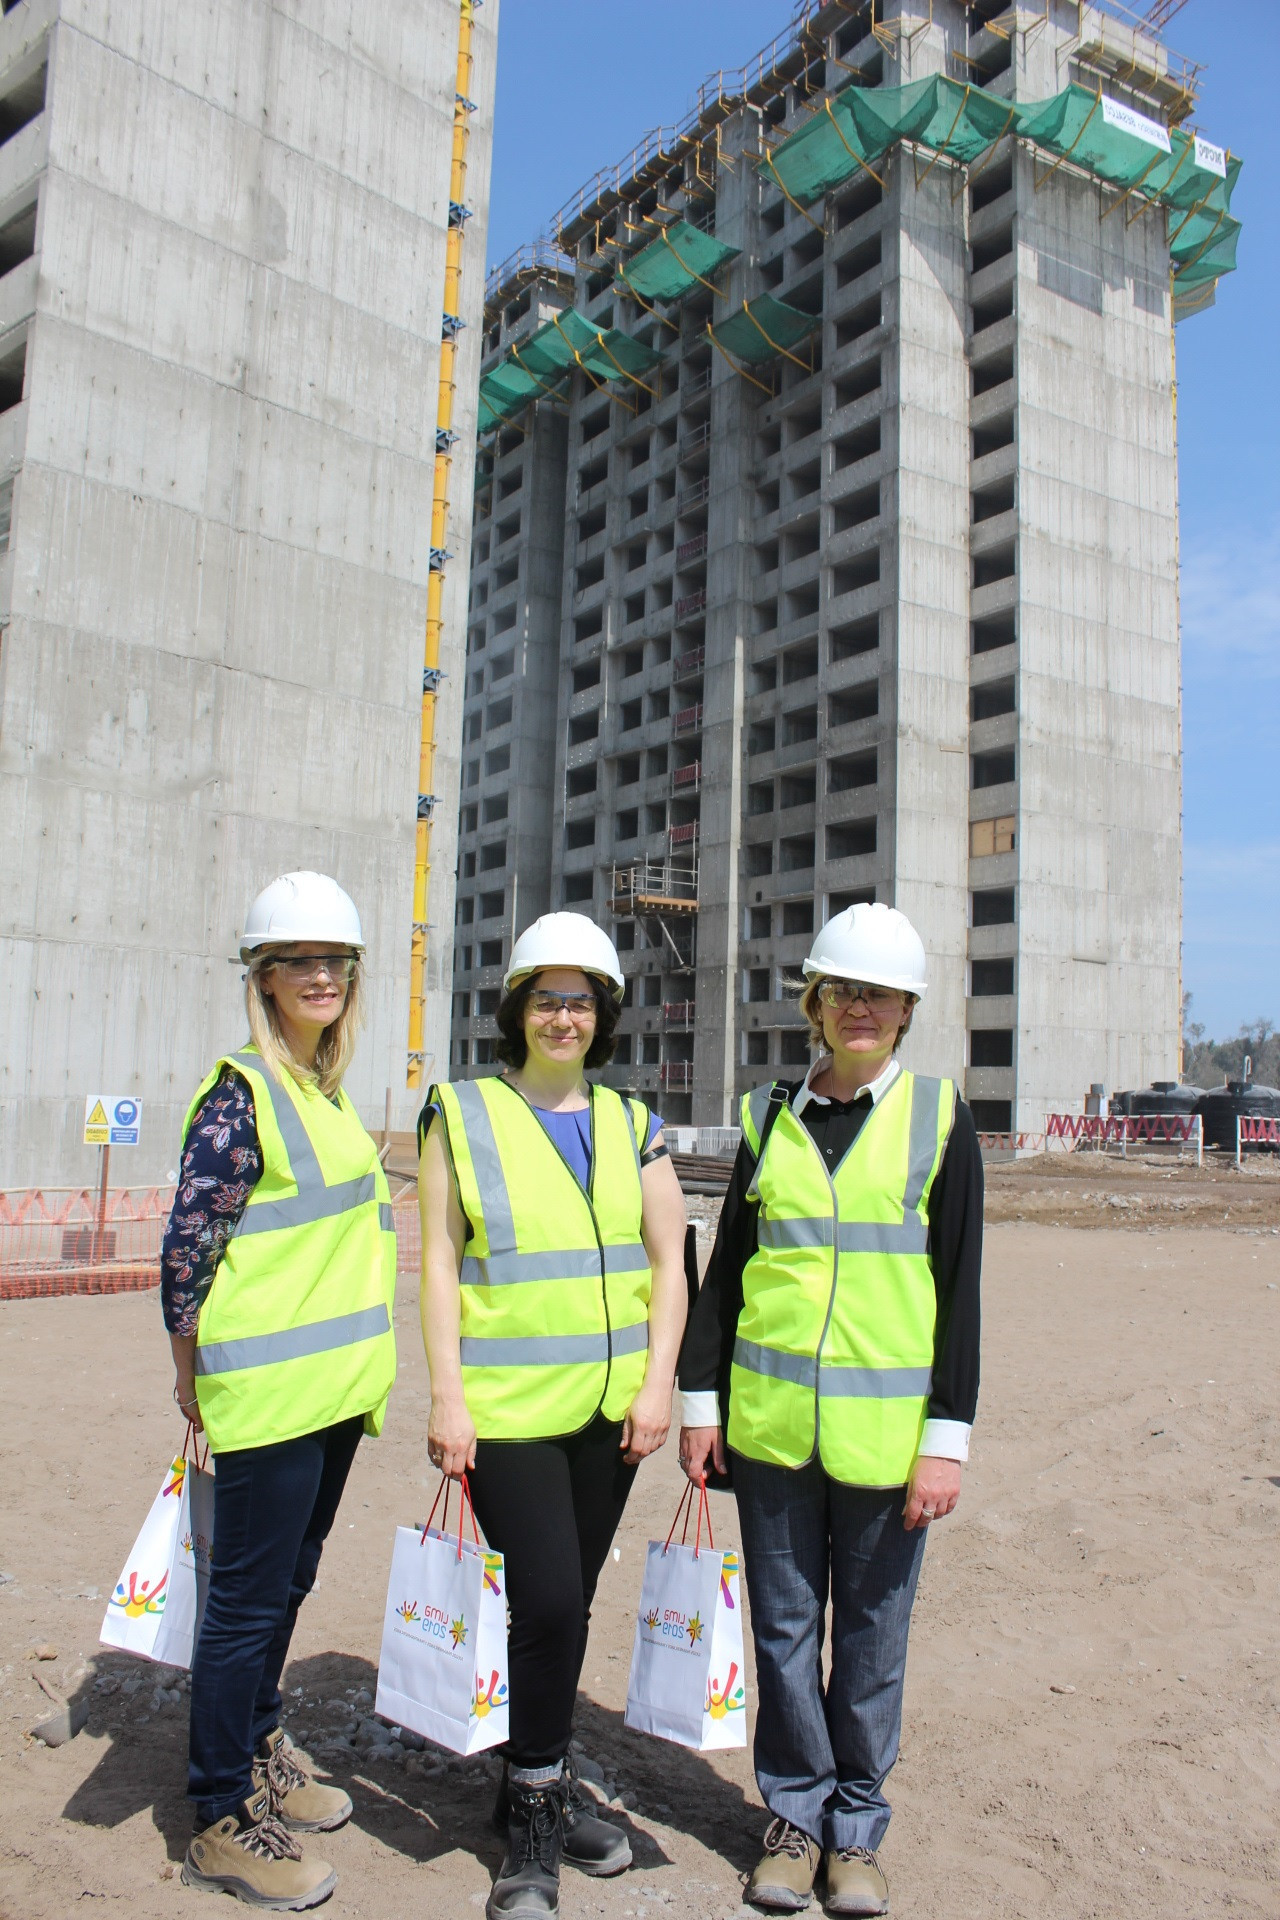 Director of international trade in Peru Francine Torbett, left, and the director general of the UK Department for International Trade Catherine Vaughan, centre, with Kate Harrison, right, at the Pan American Village ©Lima 2019